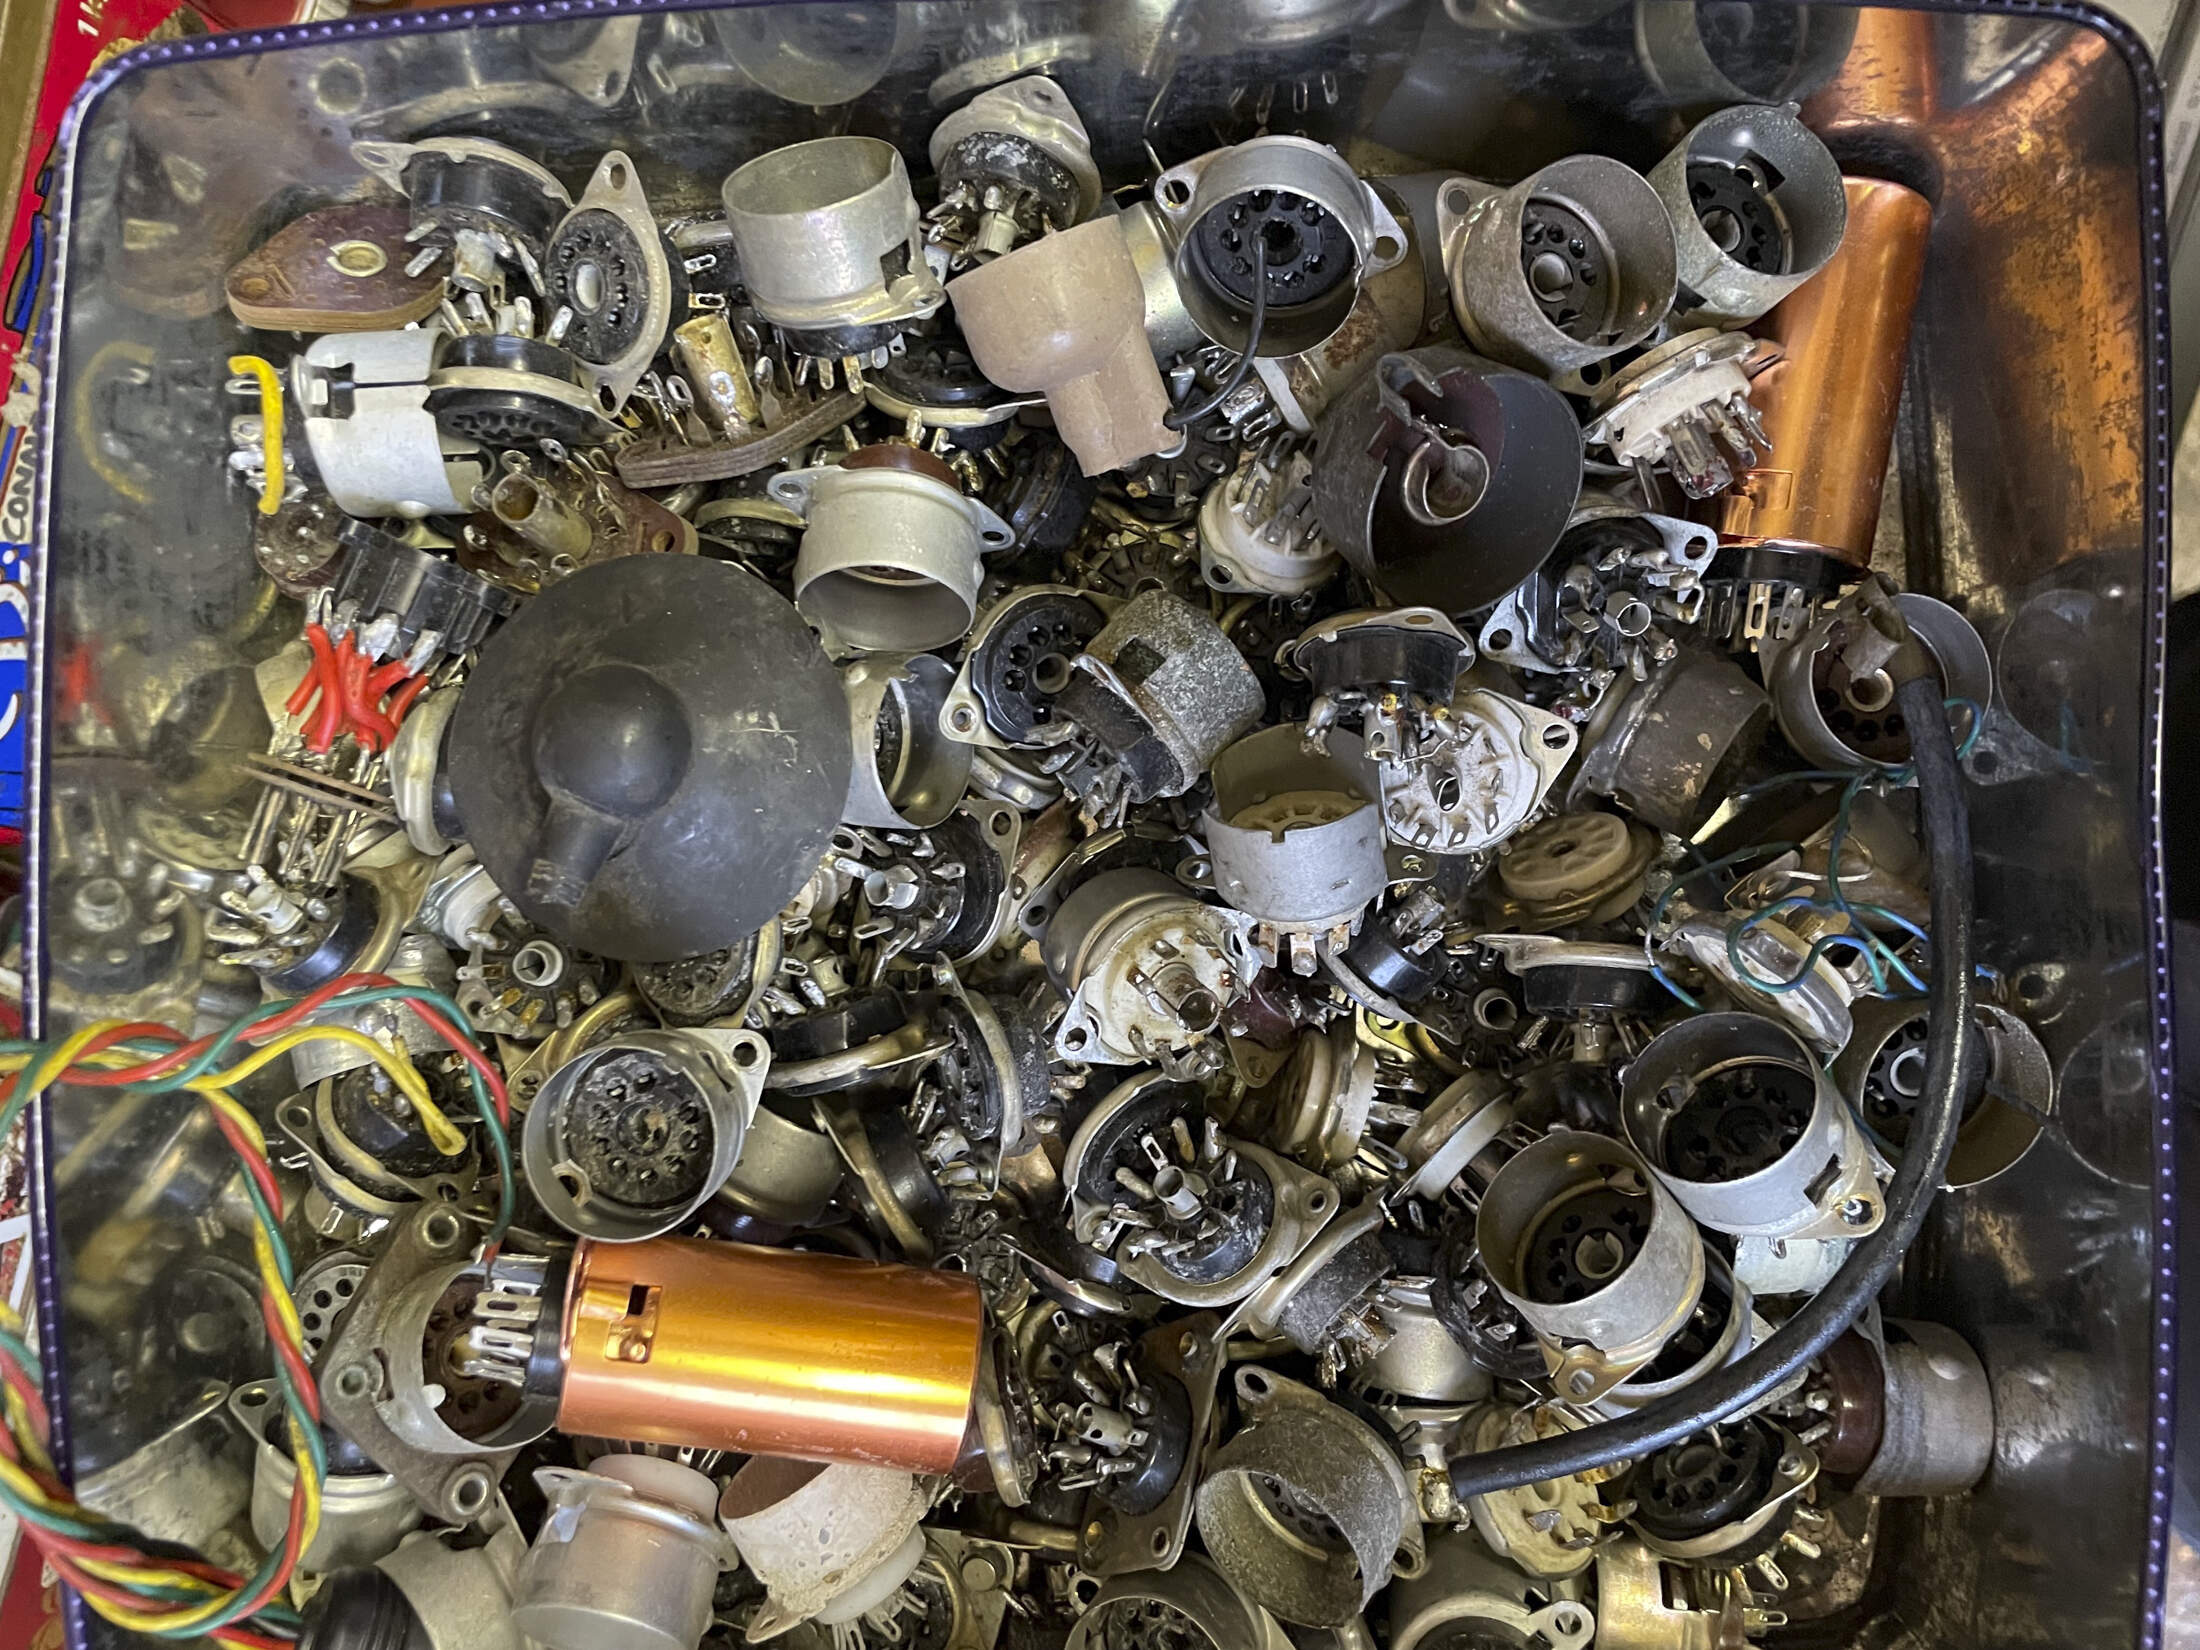 We have 1000's of valve parts